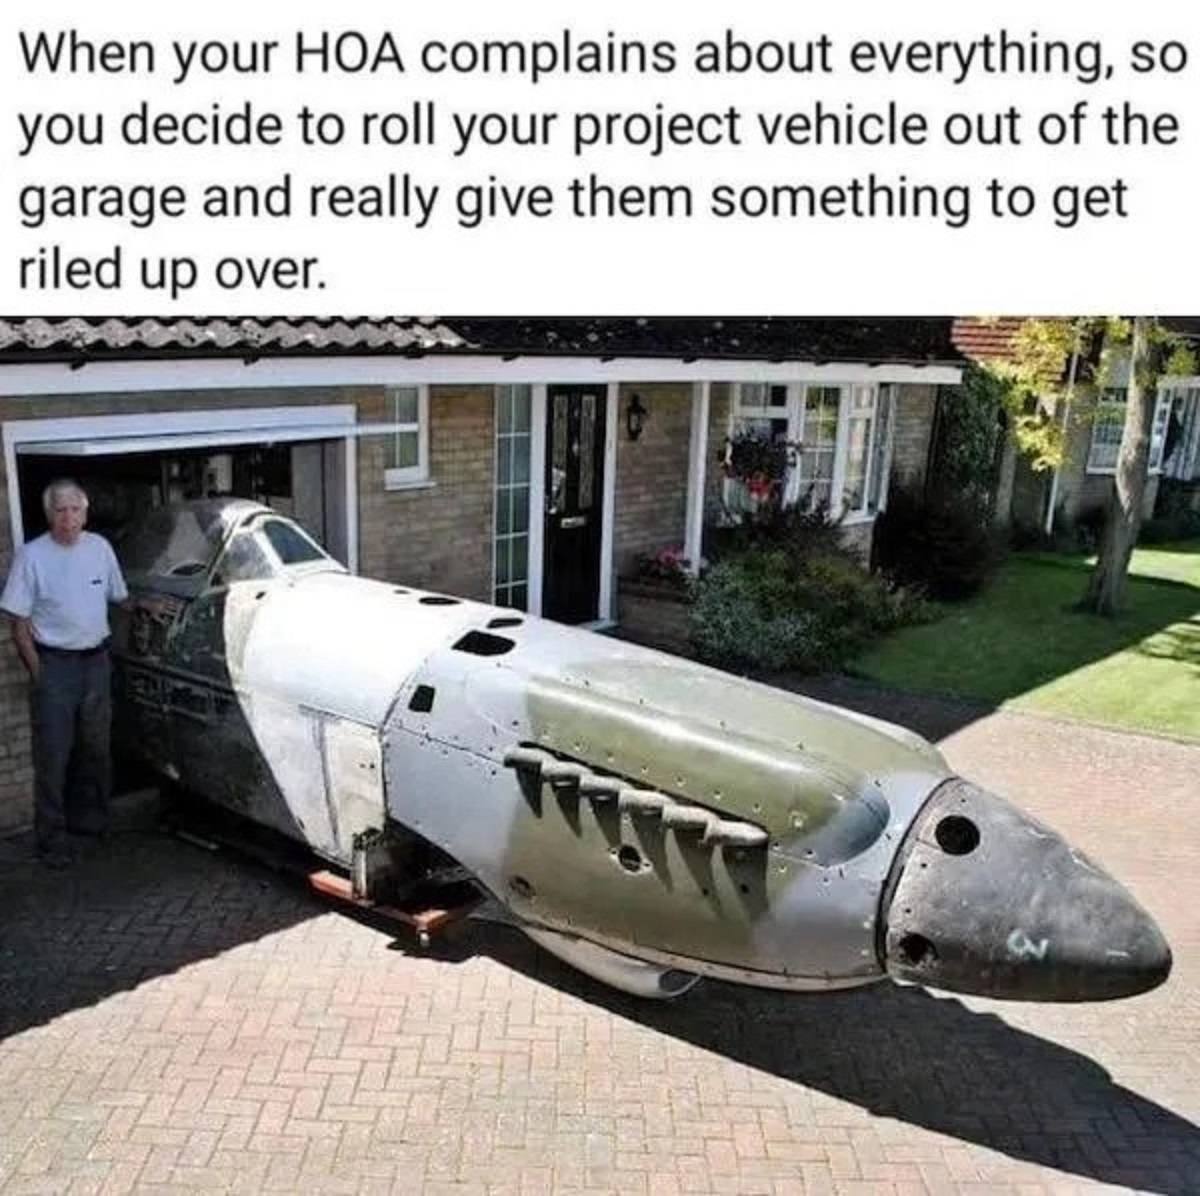 peter arnold spitfire historian - When your Hoa complains about everything, so you decide to roll your project vehicle out of the garage and really give them something to get riled up over.